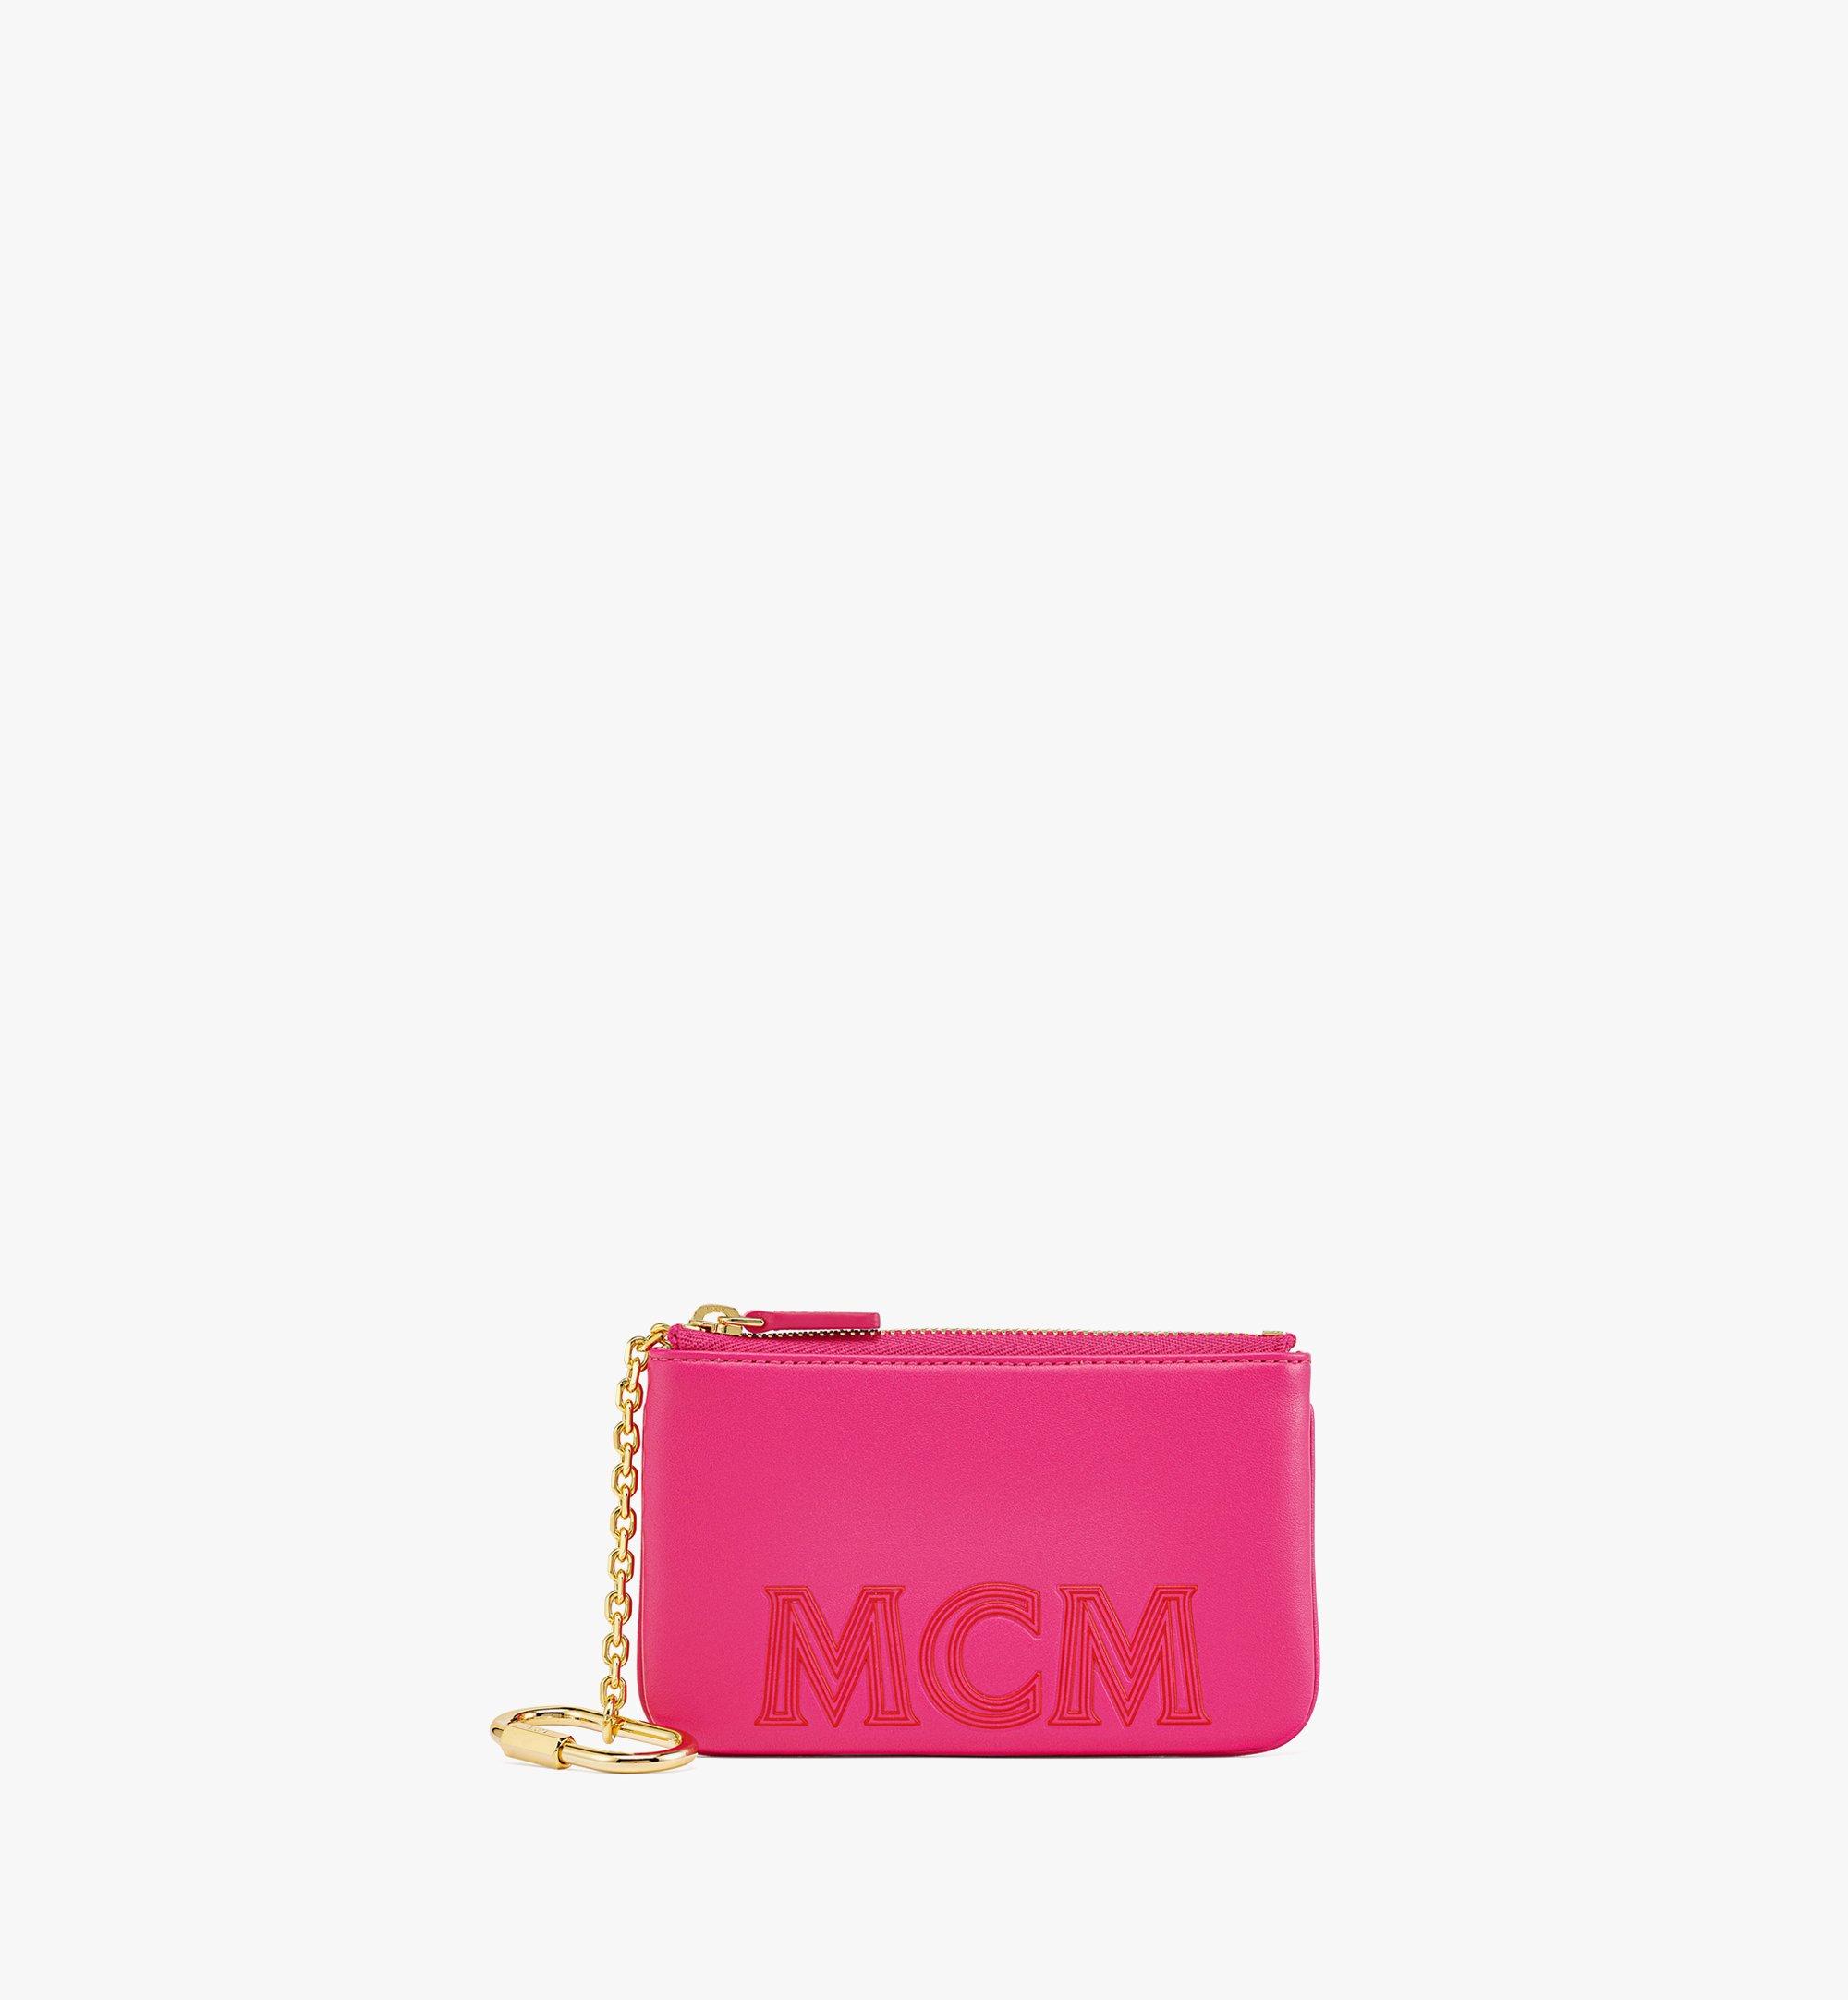 MCM Key Pouch in MCM Leather Pink MXKCSSX02QW001 Alternate View 1